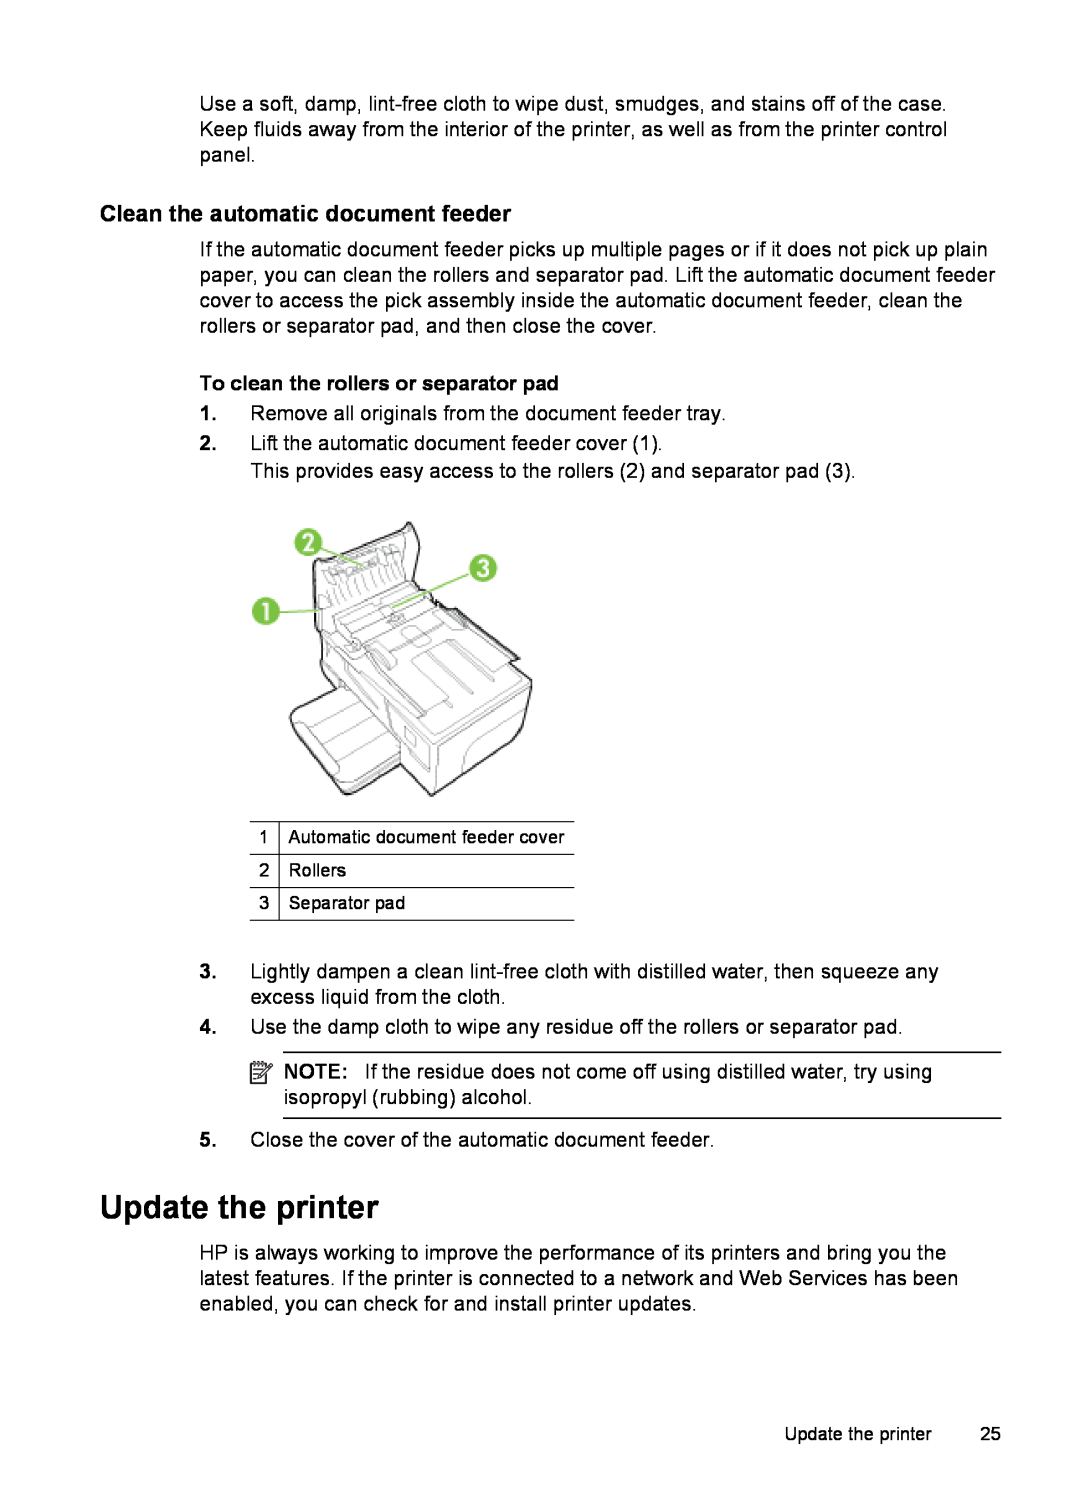 HP 6600 - H7 manual Update the printer, Clean the automatic document feeder, To clean the rollers or separator pad 